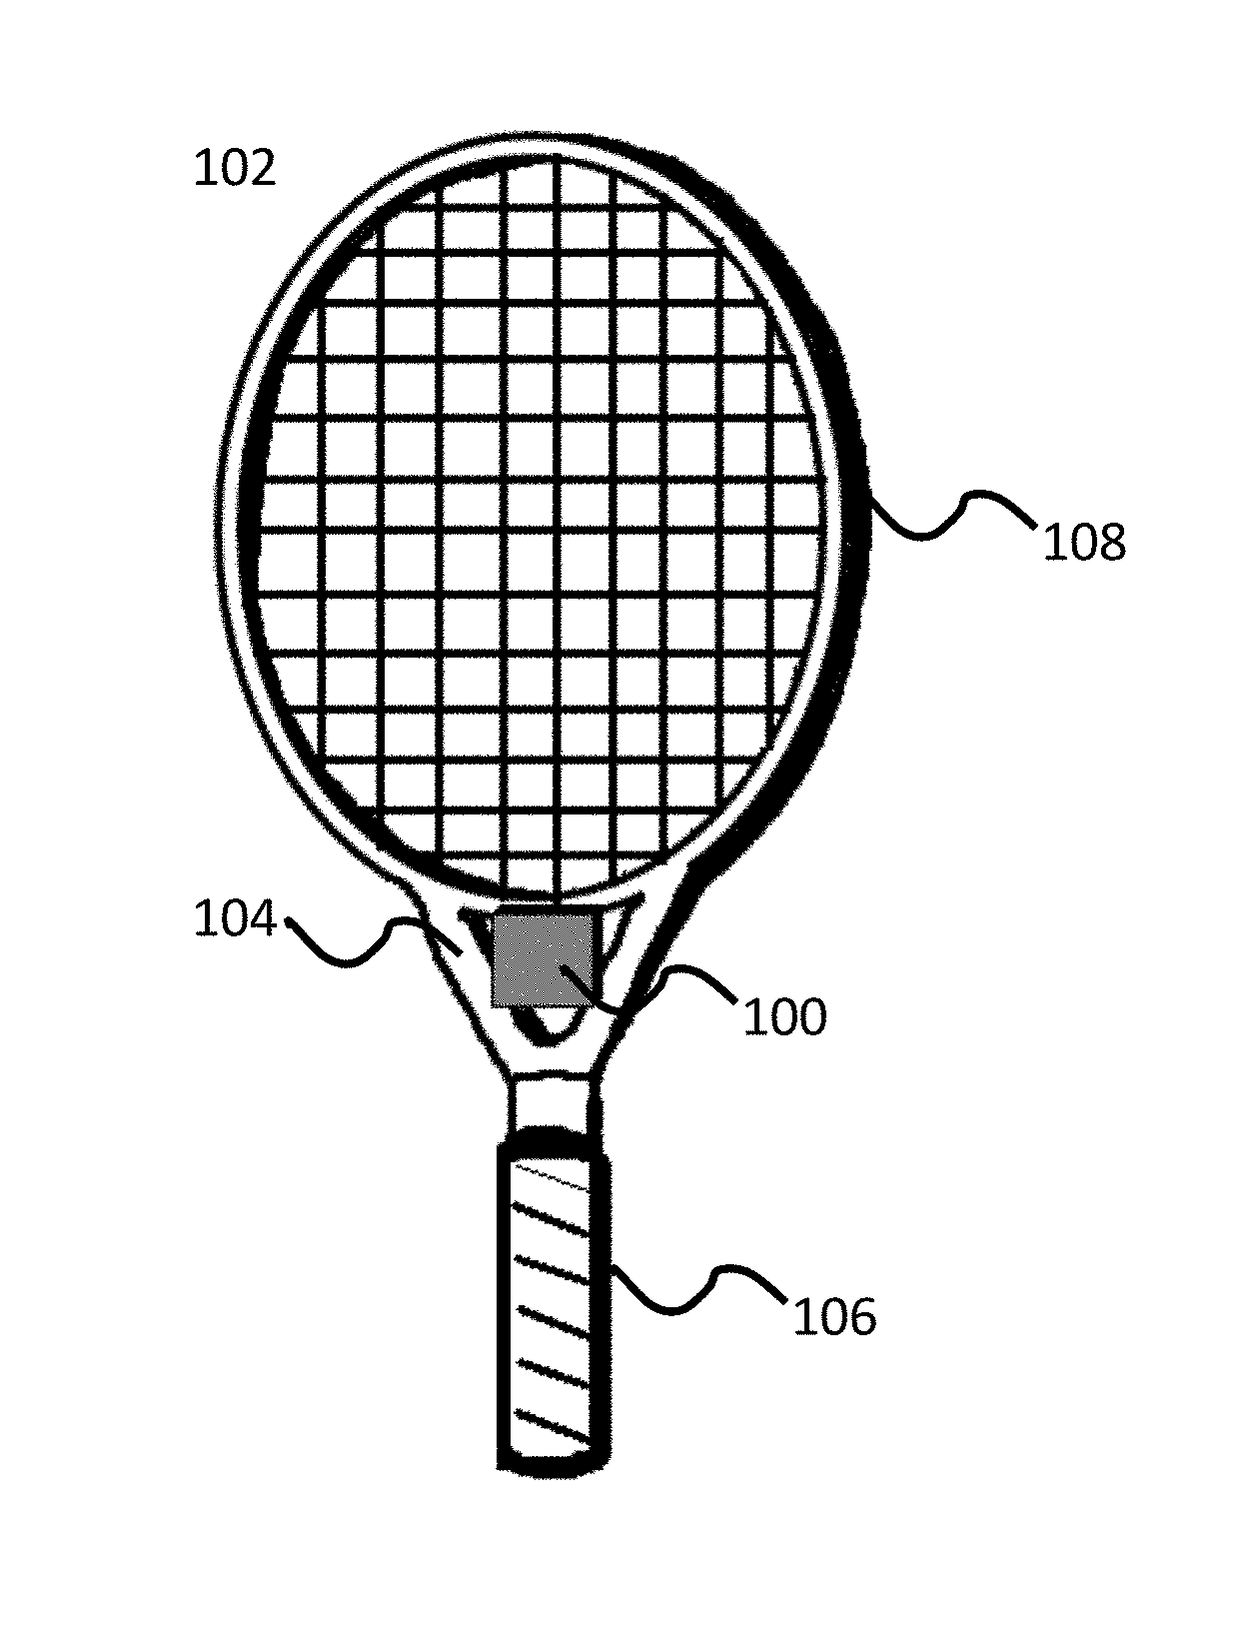 Tennis racket sensor system and coaching device